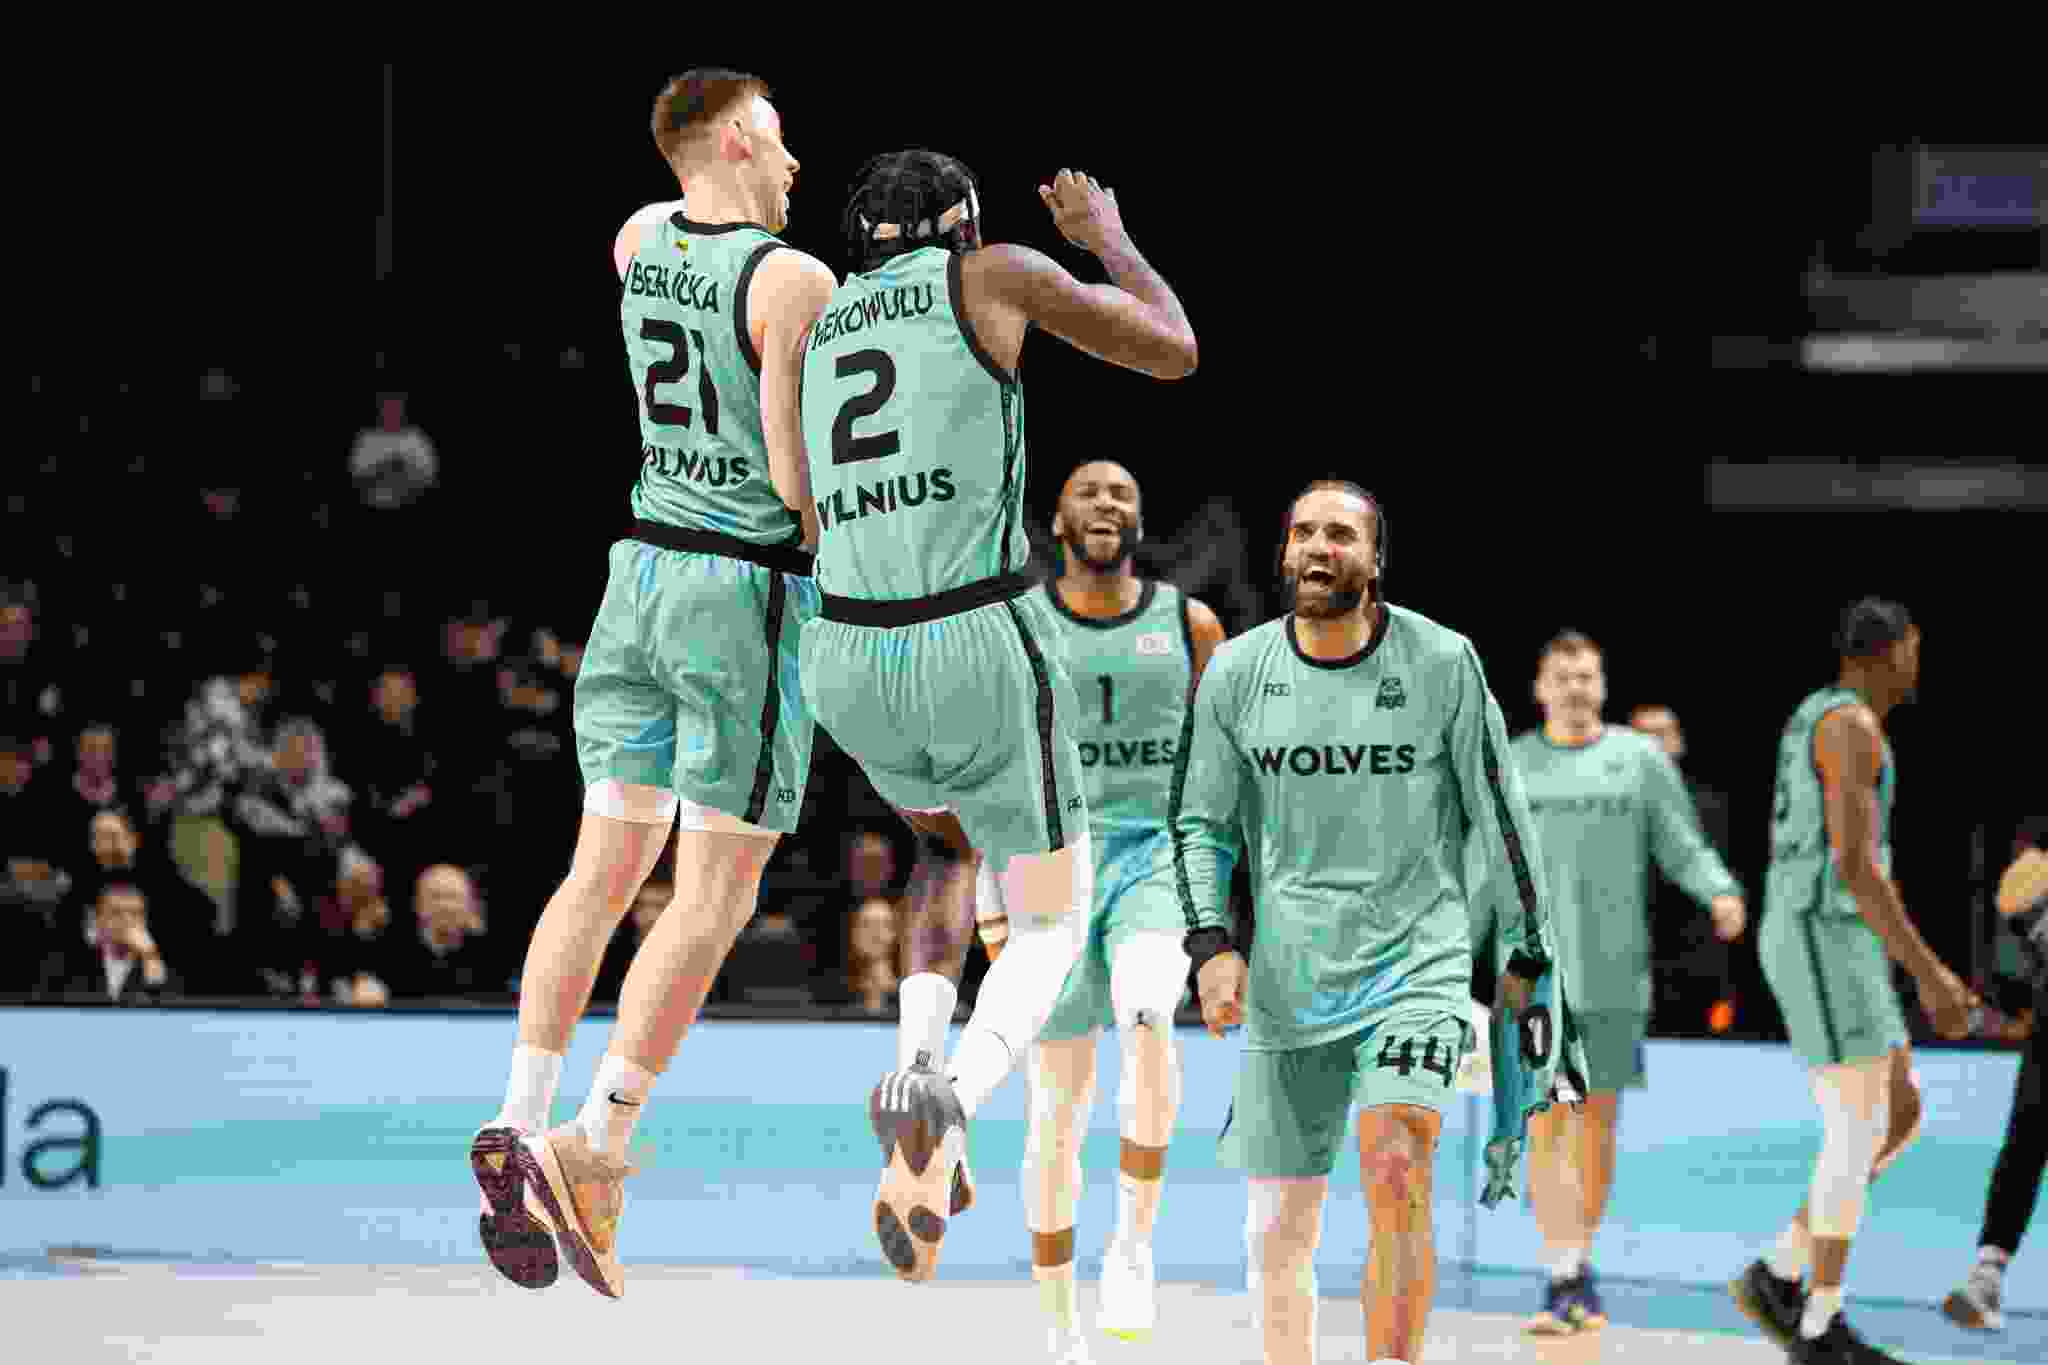 BC Wolves crush 7bet-Lietkabelis in tight battle for 3rd place